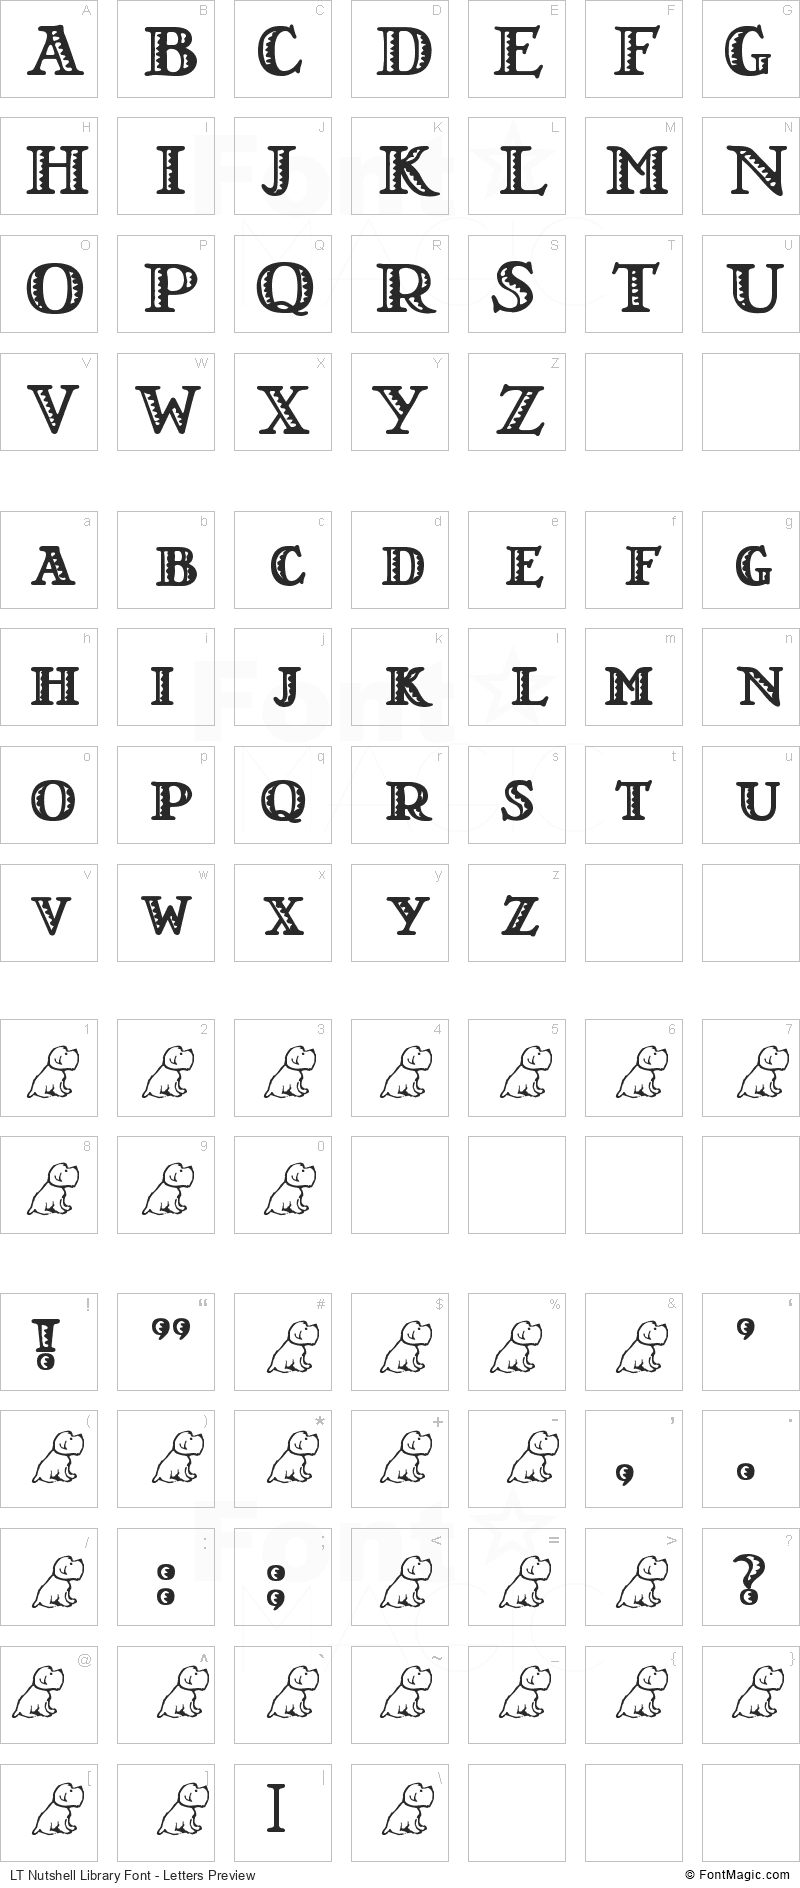 LT Nutshell Library Font - All Latters Preview Chart